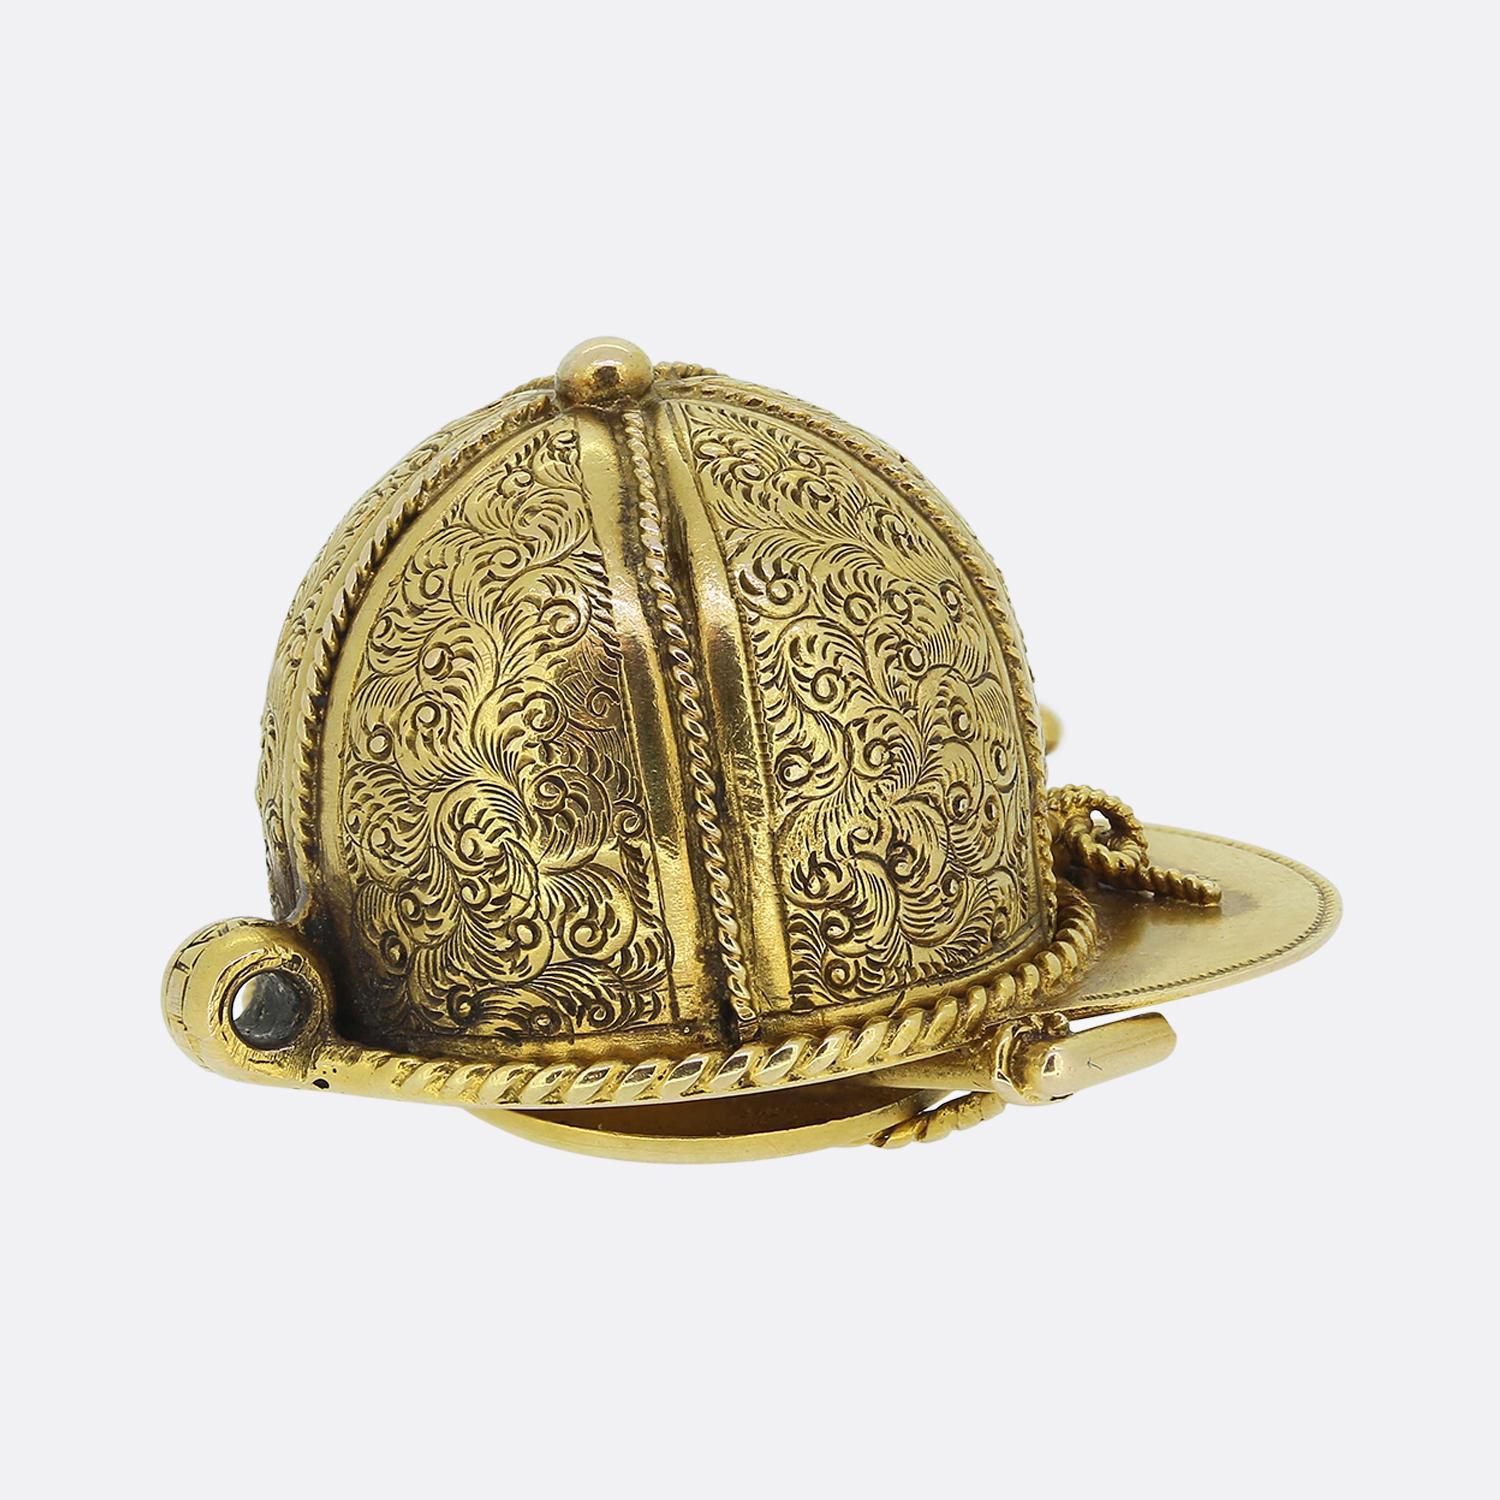 Here we have a remarkable creation taken from the Victorian era. This unique antique pendant has been crafted from a warm 18ct yellow gold into the shape of a horse riding hat. The hat itself showcases ornately engraved decoration with finely roped